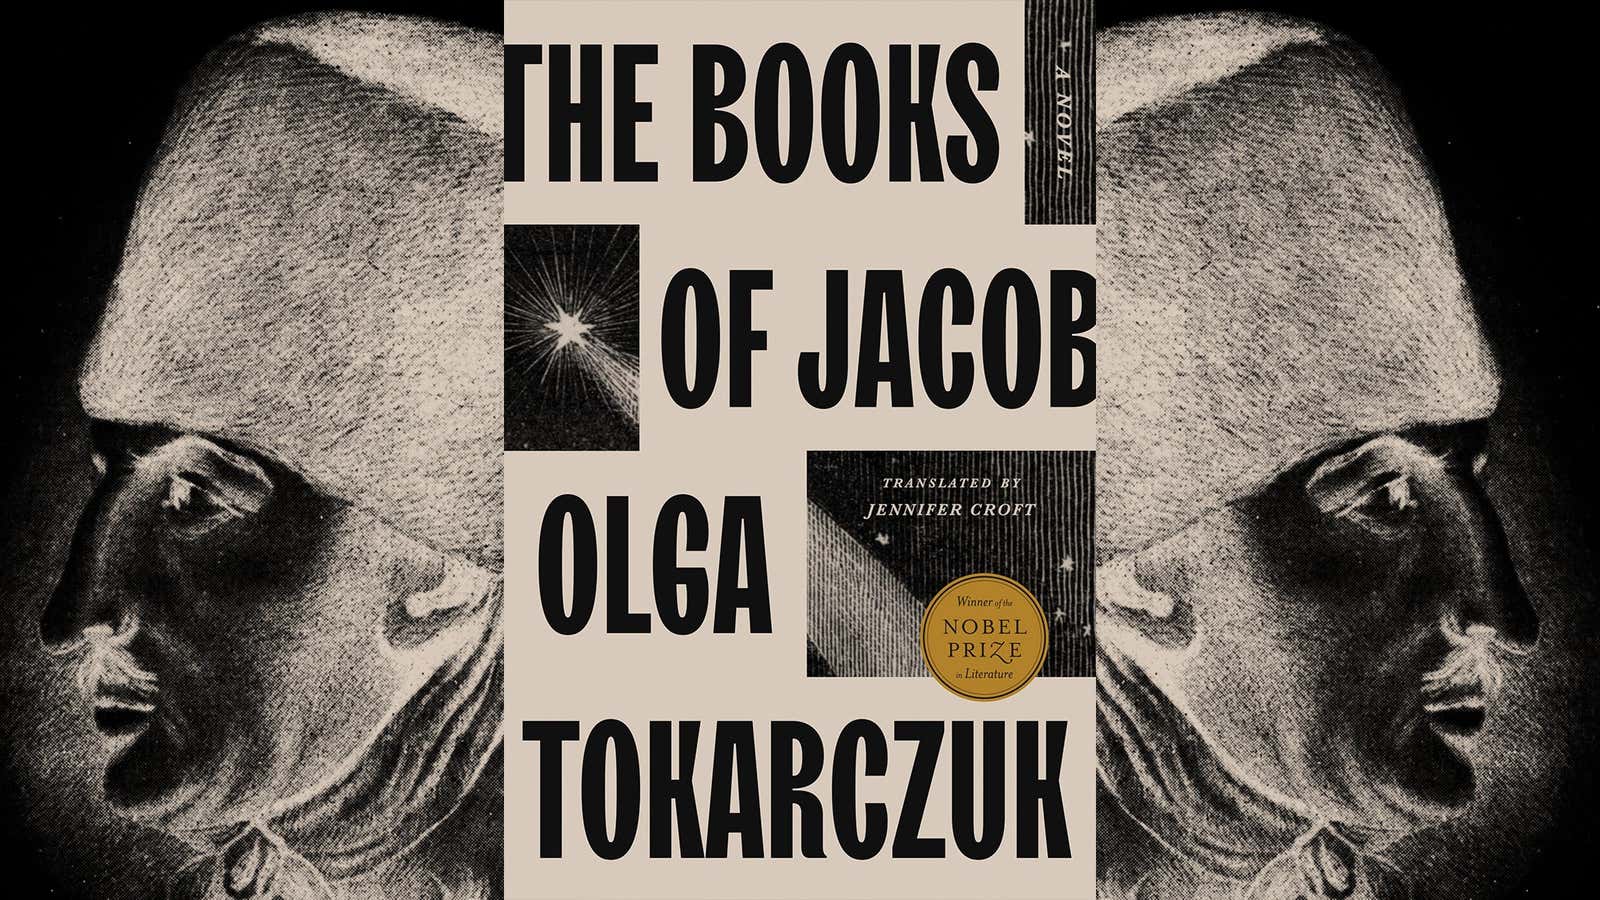 In <i>The Books Of Jacob</i>, a Nobel laureate tells the epic story of a self-proclaimed messiah